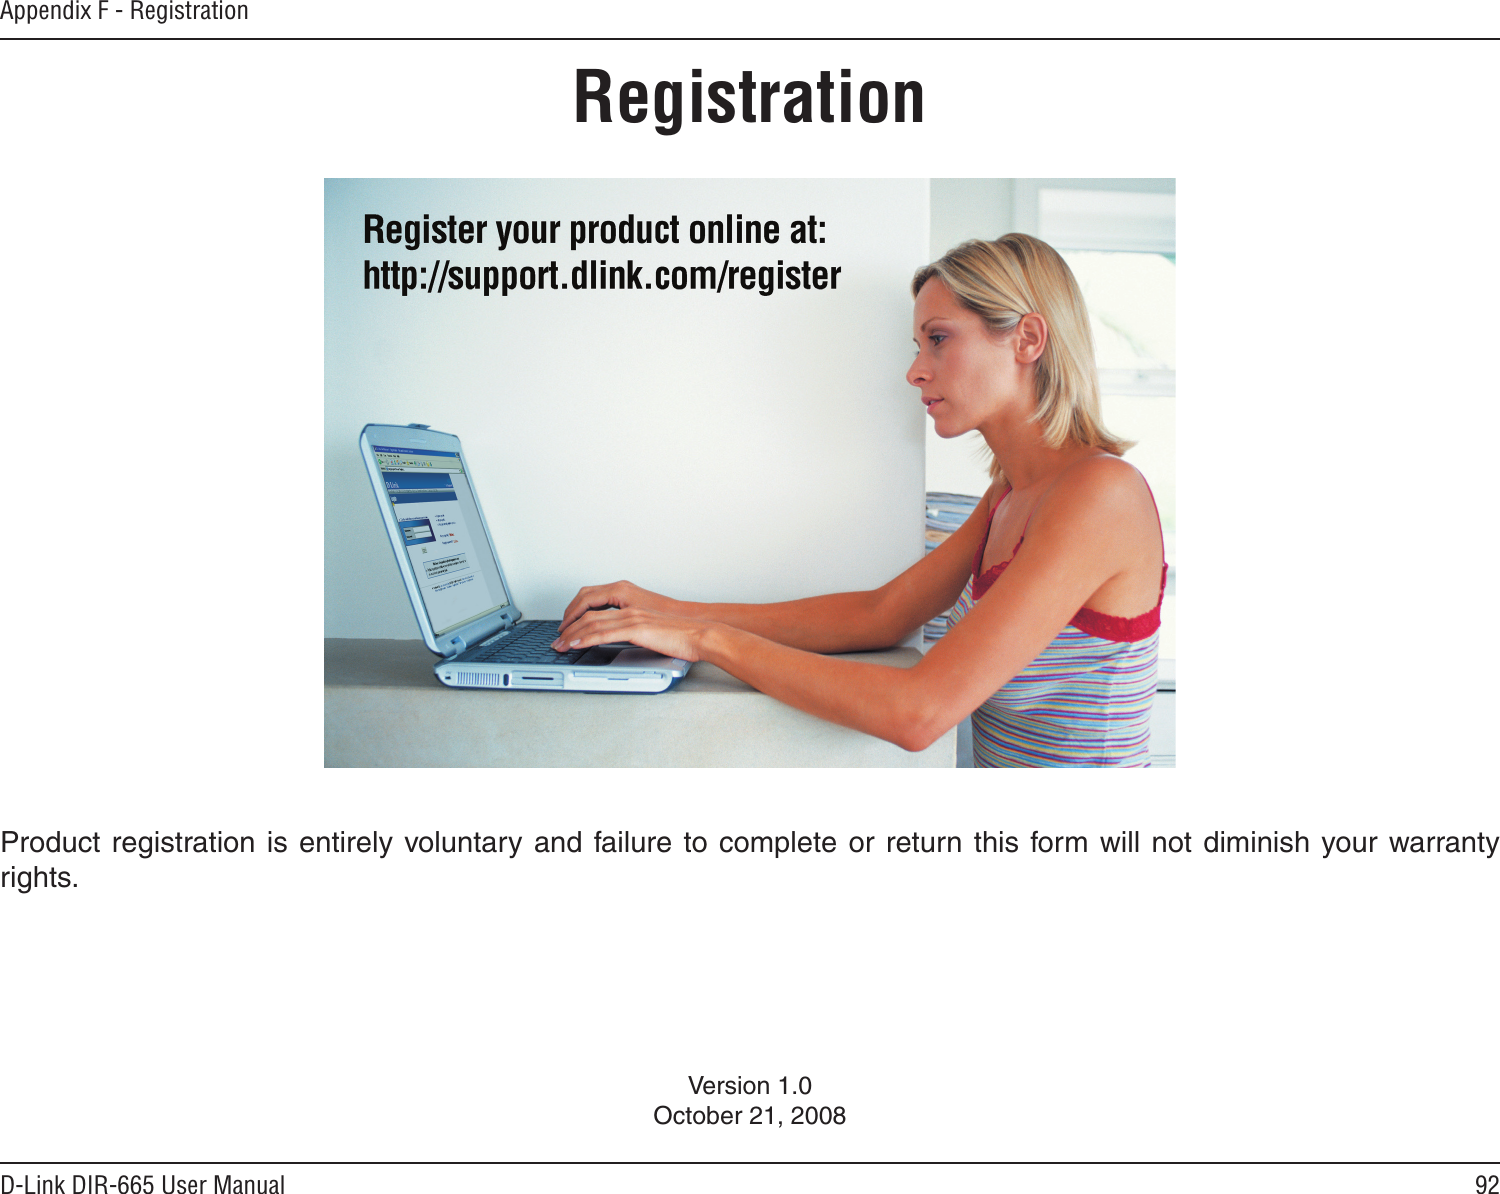 92D-Link DIR-665 User ManualAppendix F - RegistrationVersion 1.0October 21, 2008Product registration is entirely voluntary and  failure to complete or  return this form will not diminish your warranty rights.Registration